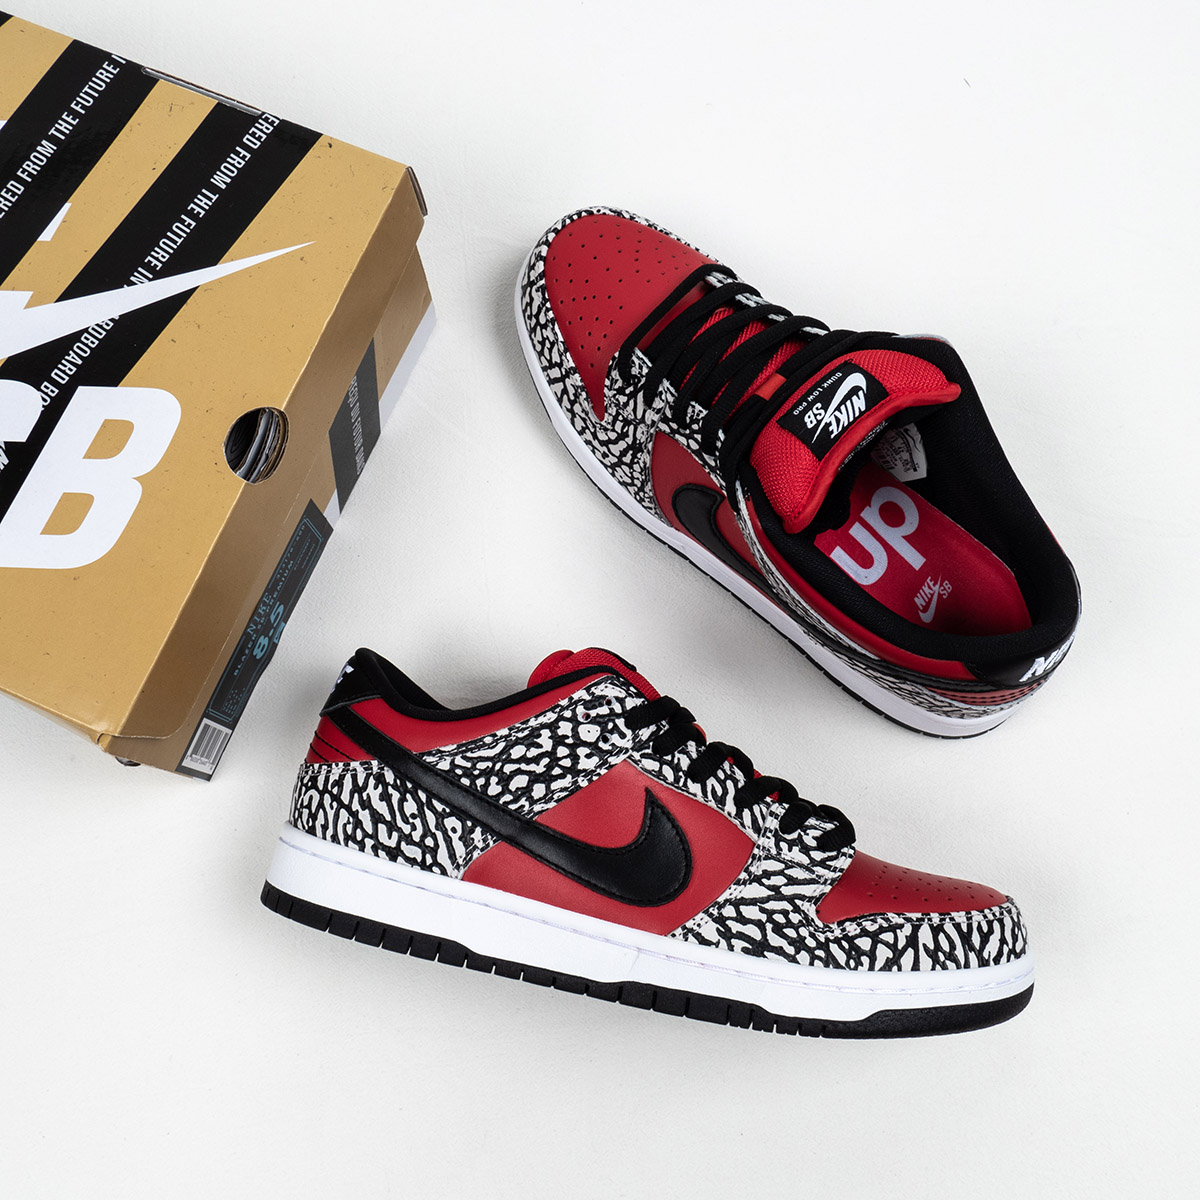 Supreme x Nike SB Dunk Low "Red Cement" Shoes